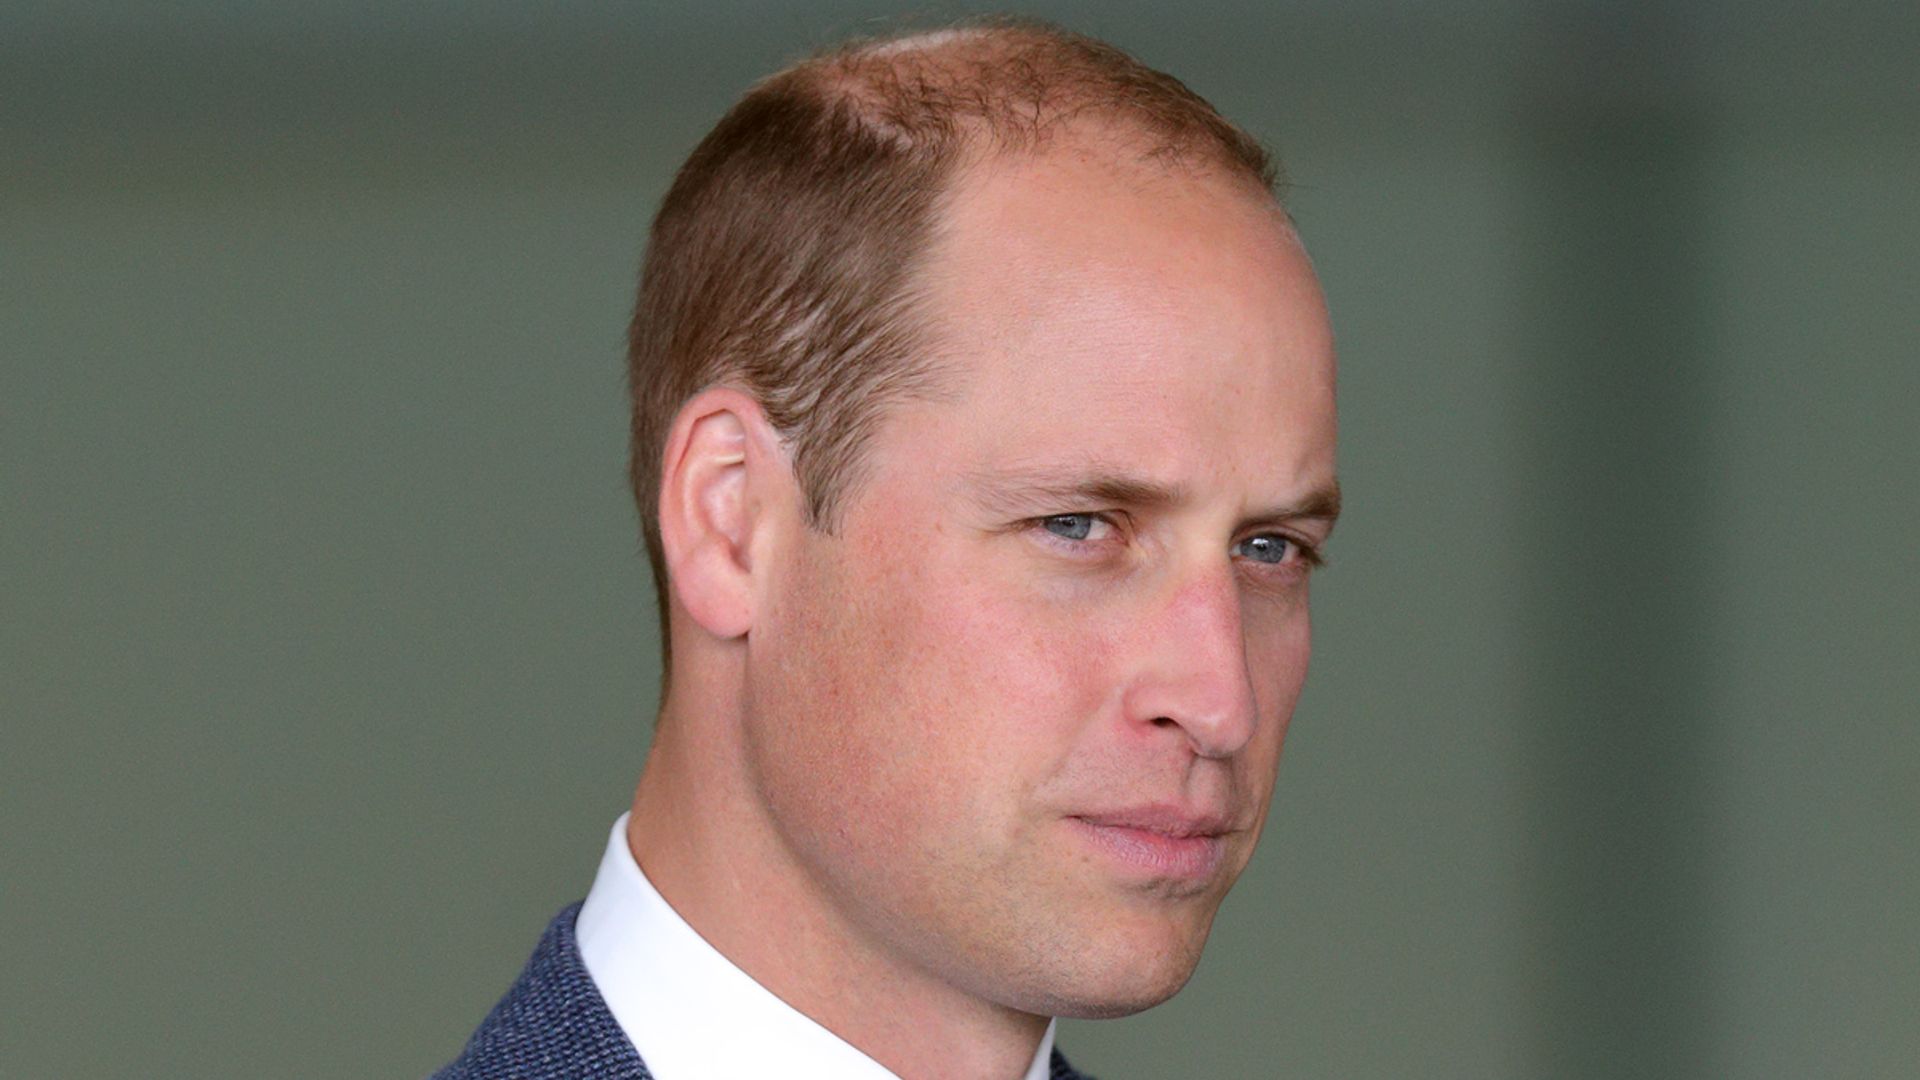 Prince William follows in Queen's footsteps with surprise appearance at memorial service